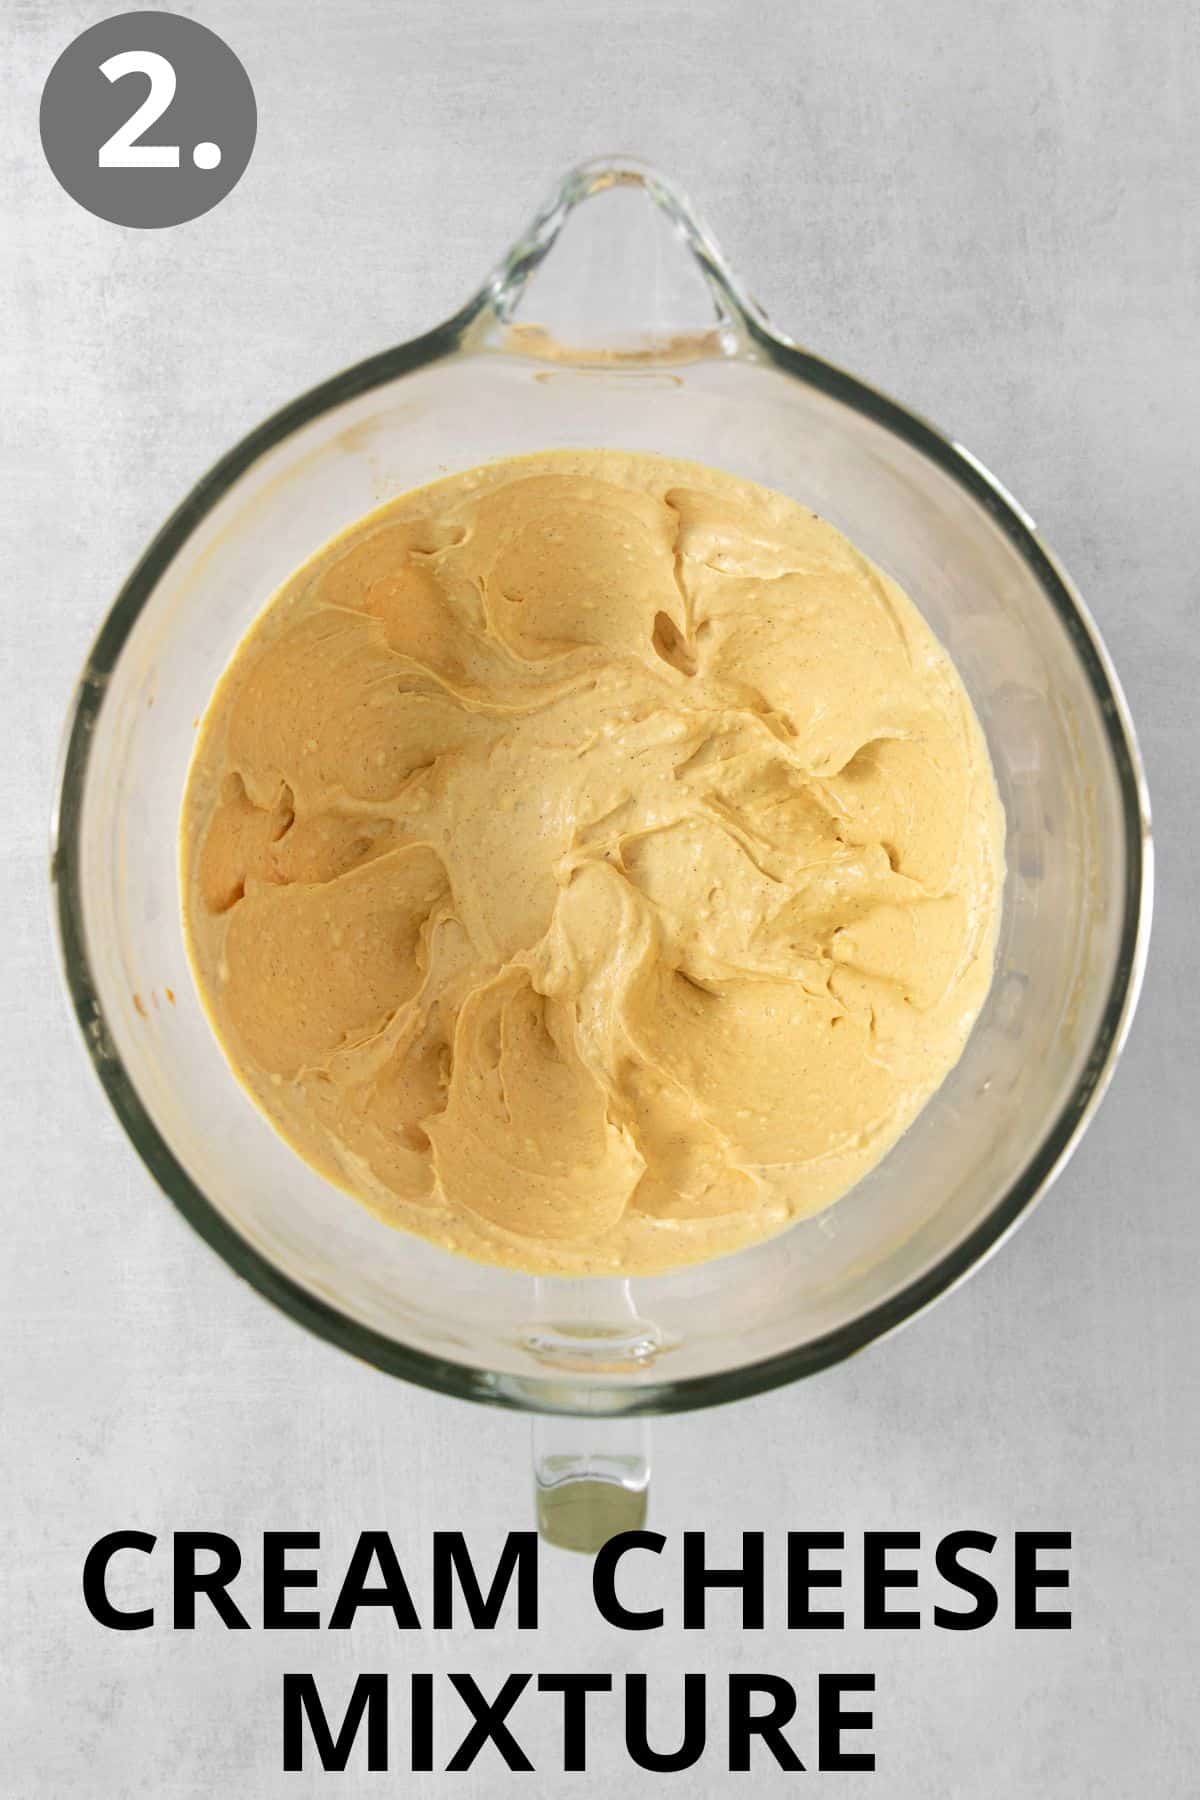 Cream cheese mixture blended in a glass mixing bowl